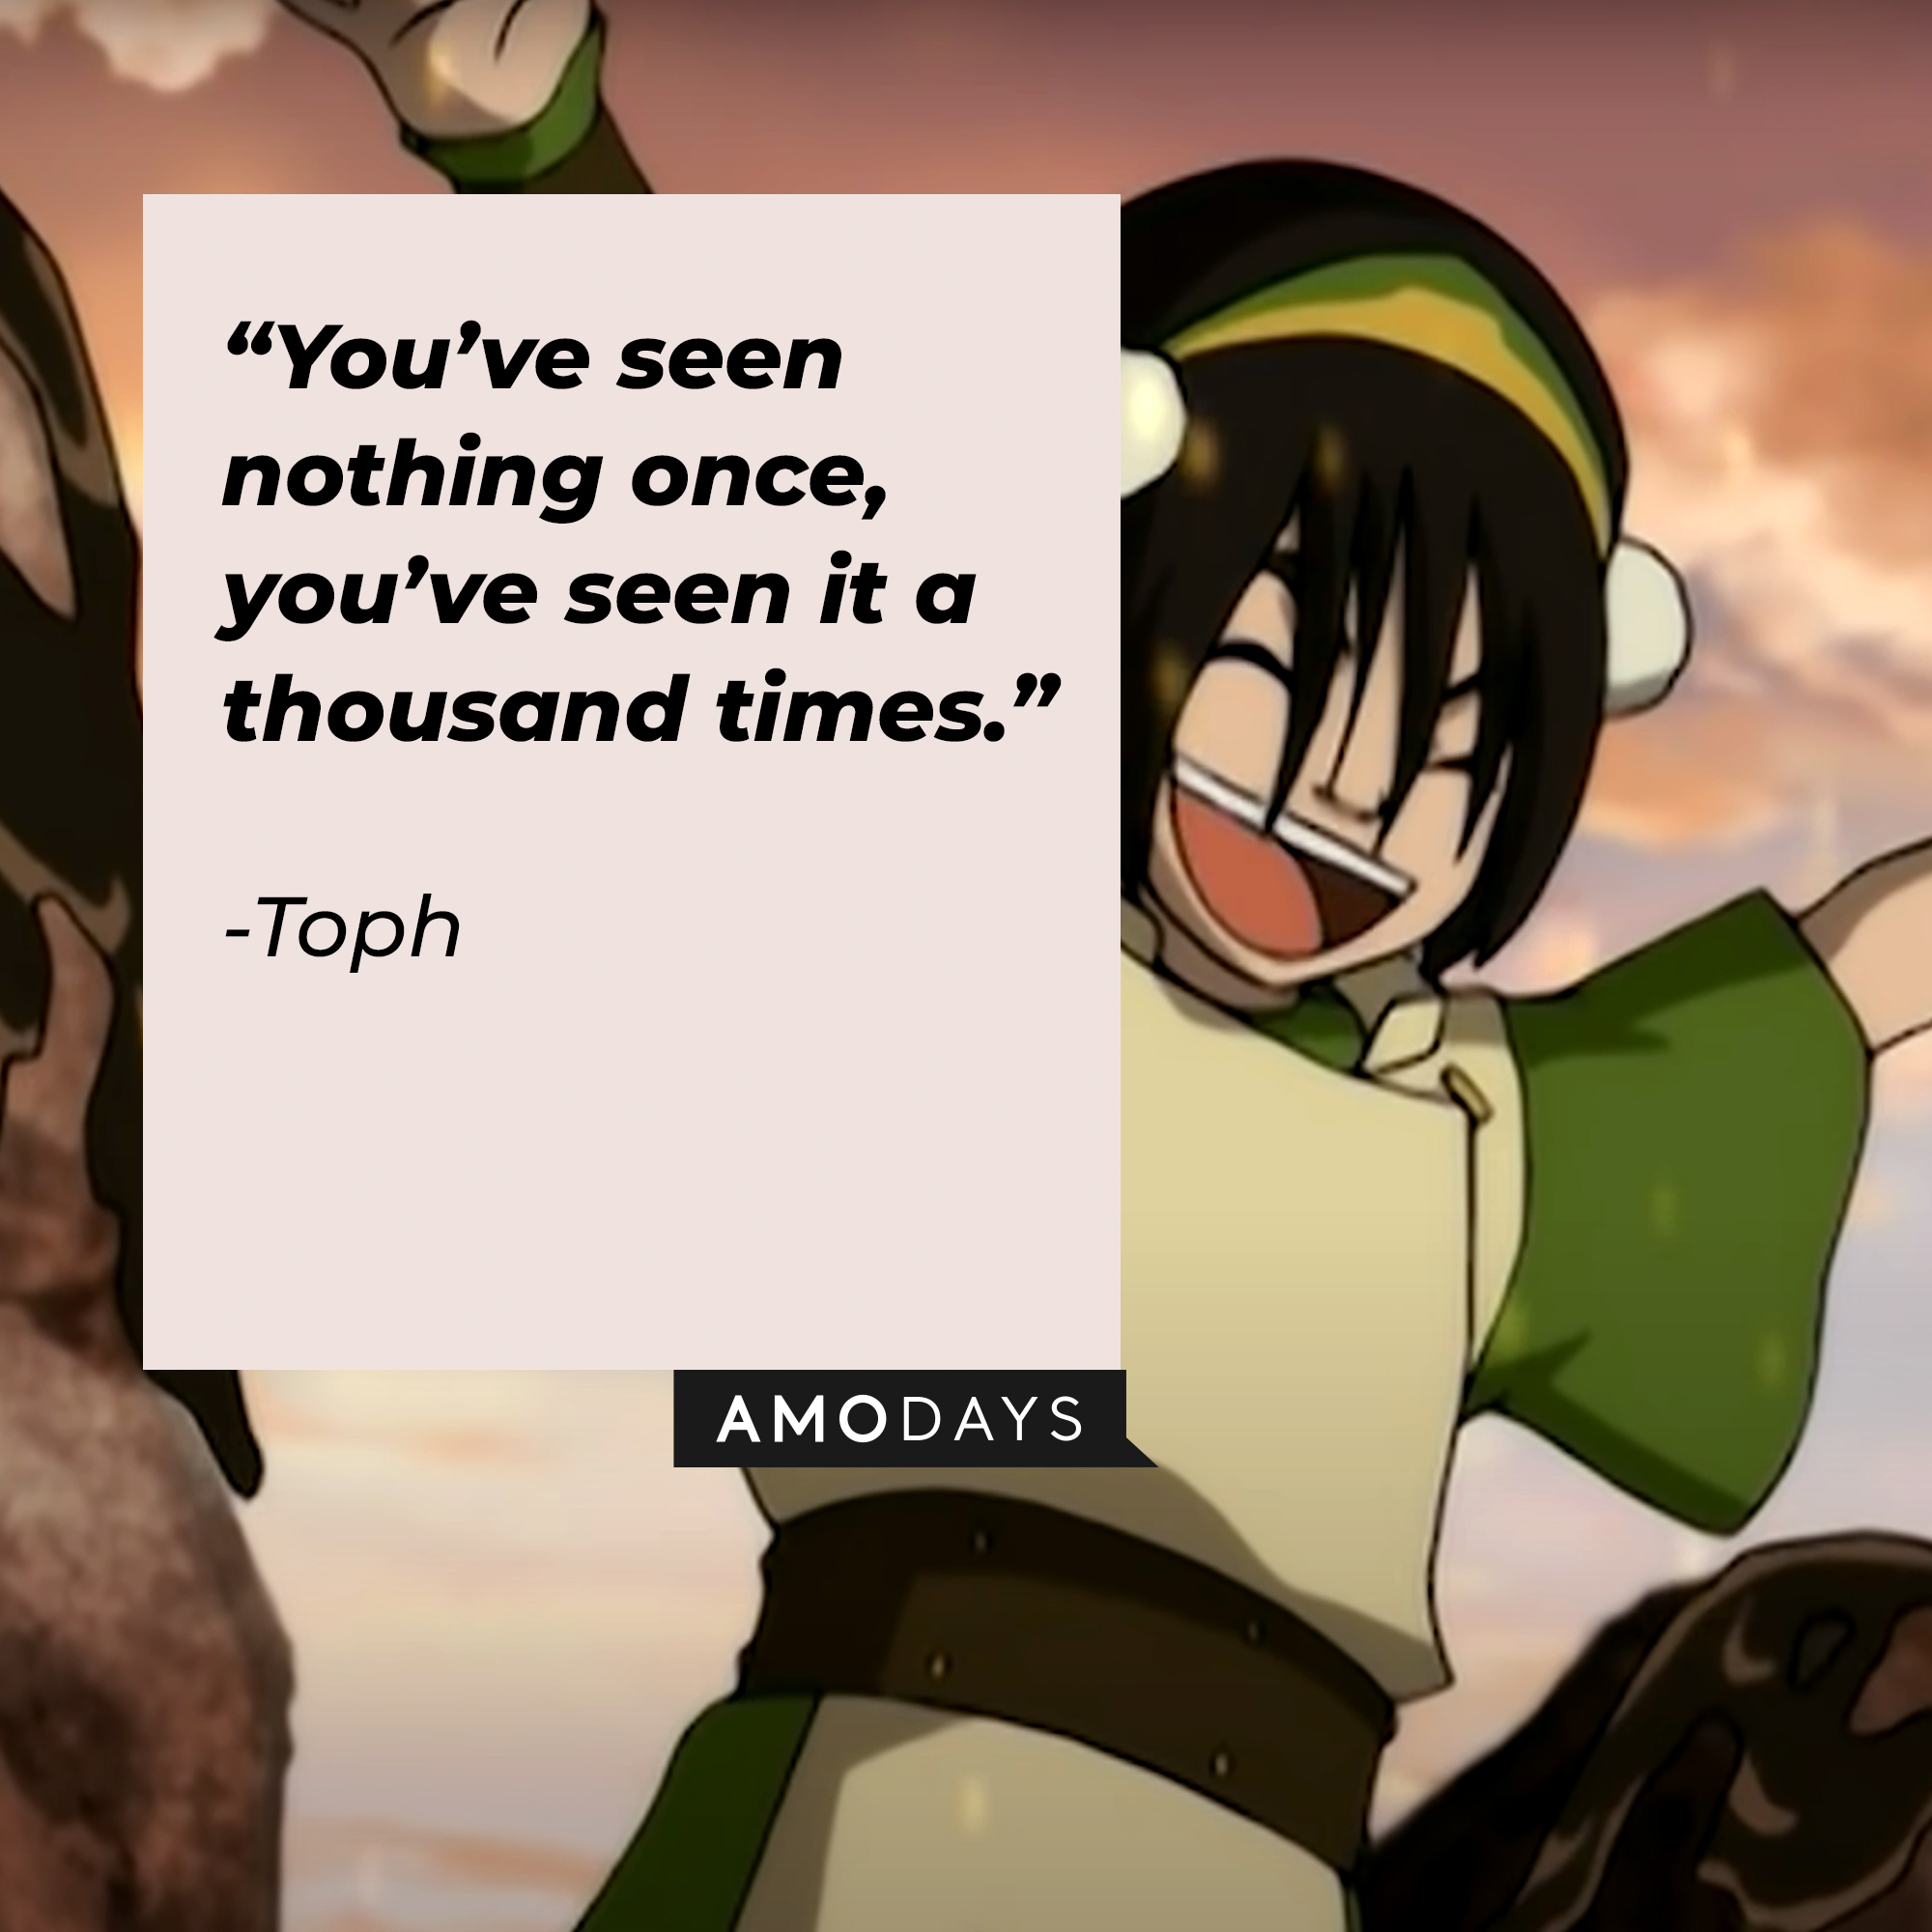 Toph's quote: “You’ve seen nothing once, you’ve seen it a thousand times." | Source: youtube.com/TeamAvatar